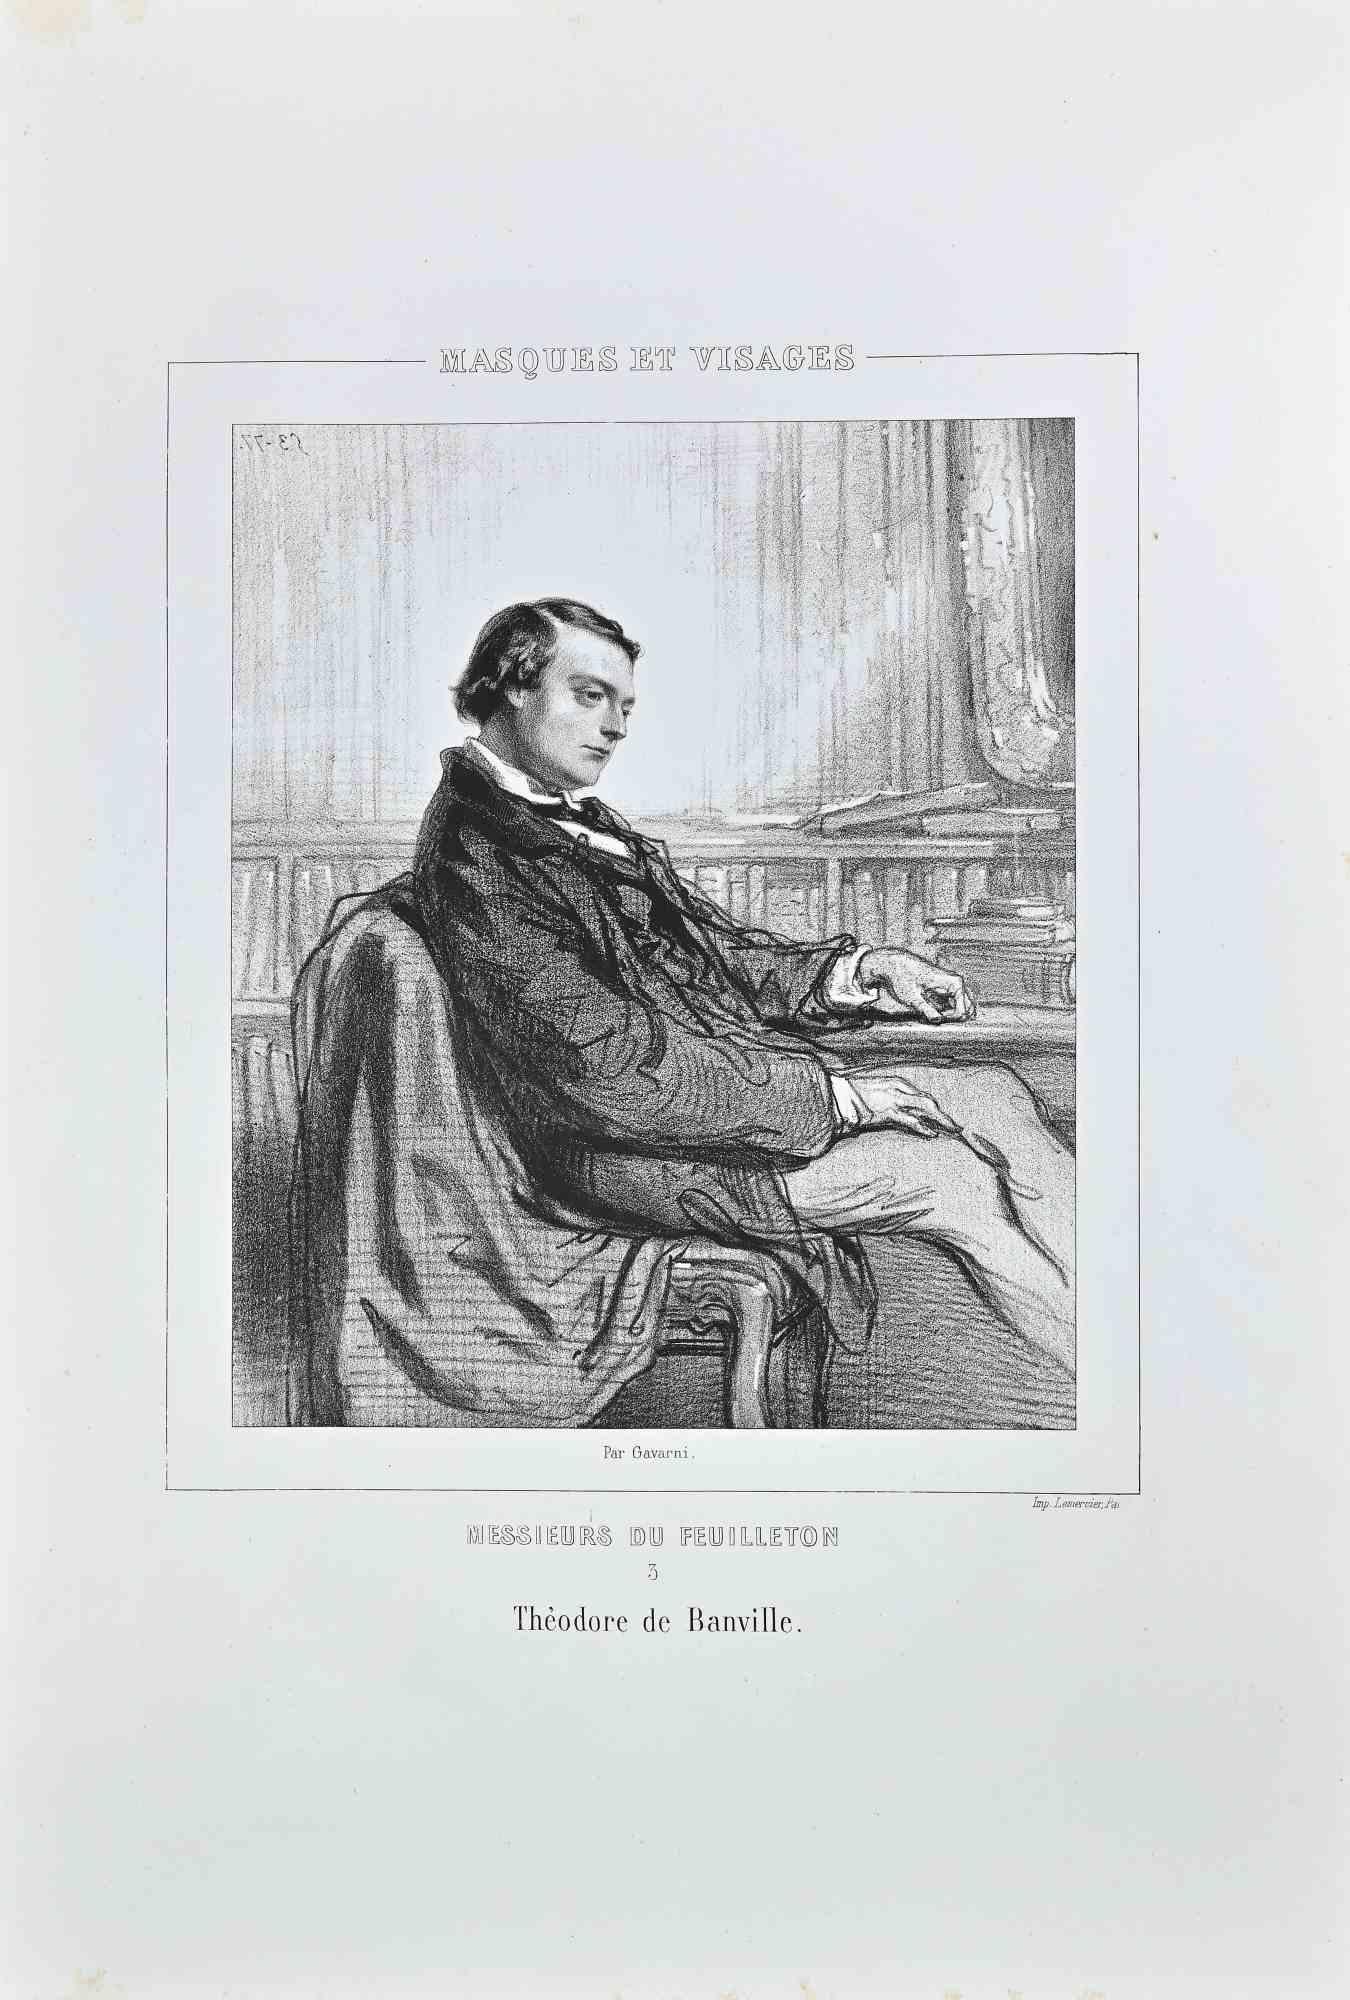 Messieurs Du Feuilleton (Portrait of Théoore de Banville) is a lithograph on ivory-colored paper, realized by the French draftsman Paul Gavarni (alias Guillaume Sulpice Chevalier Gavarni, 1804-1866) in the mid-19th Century.

From series of "Masques